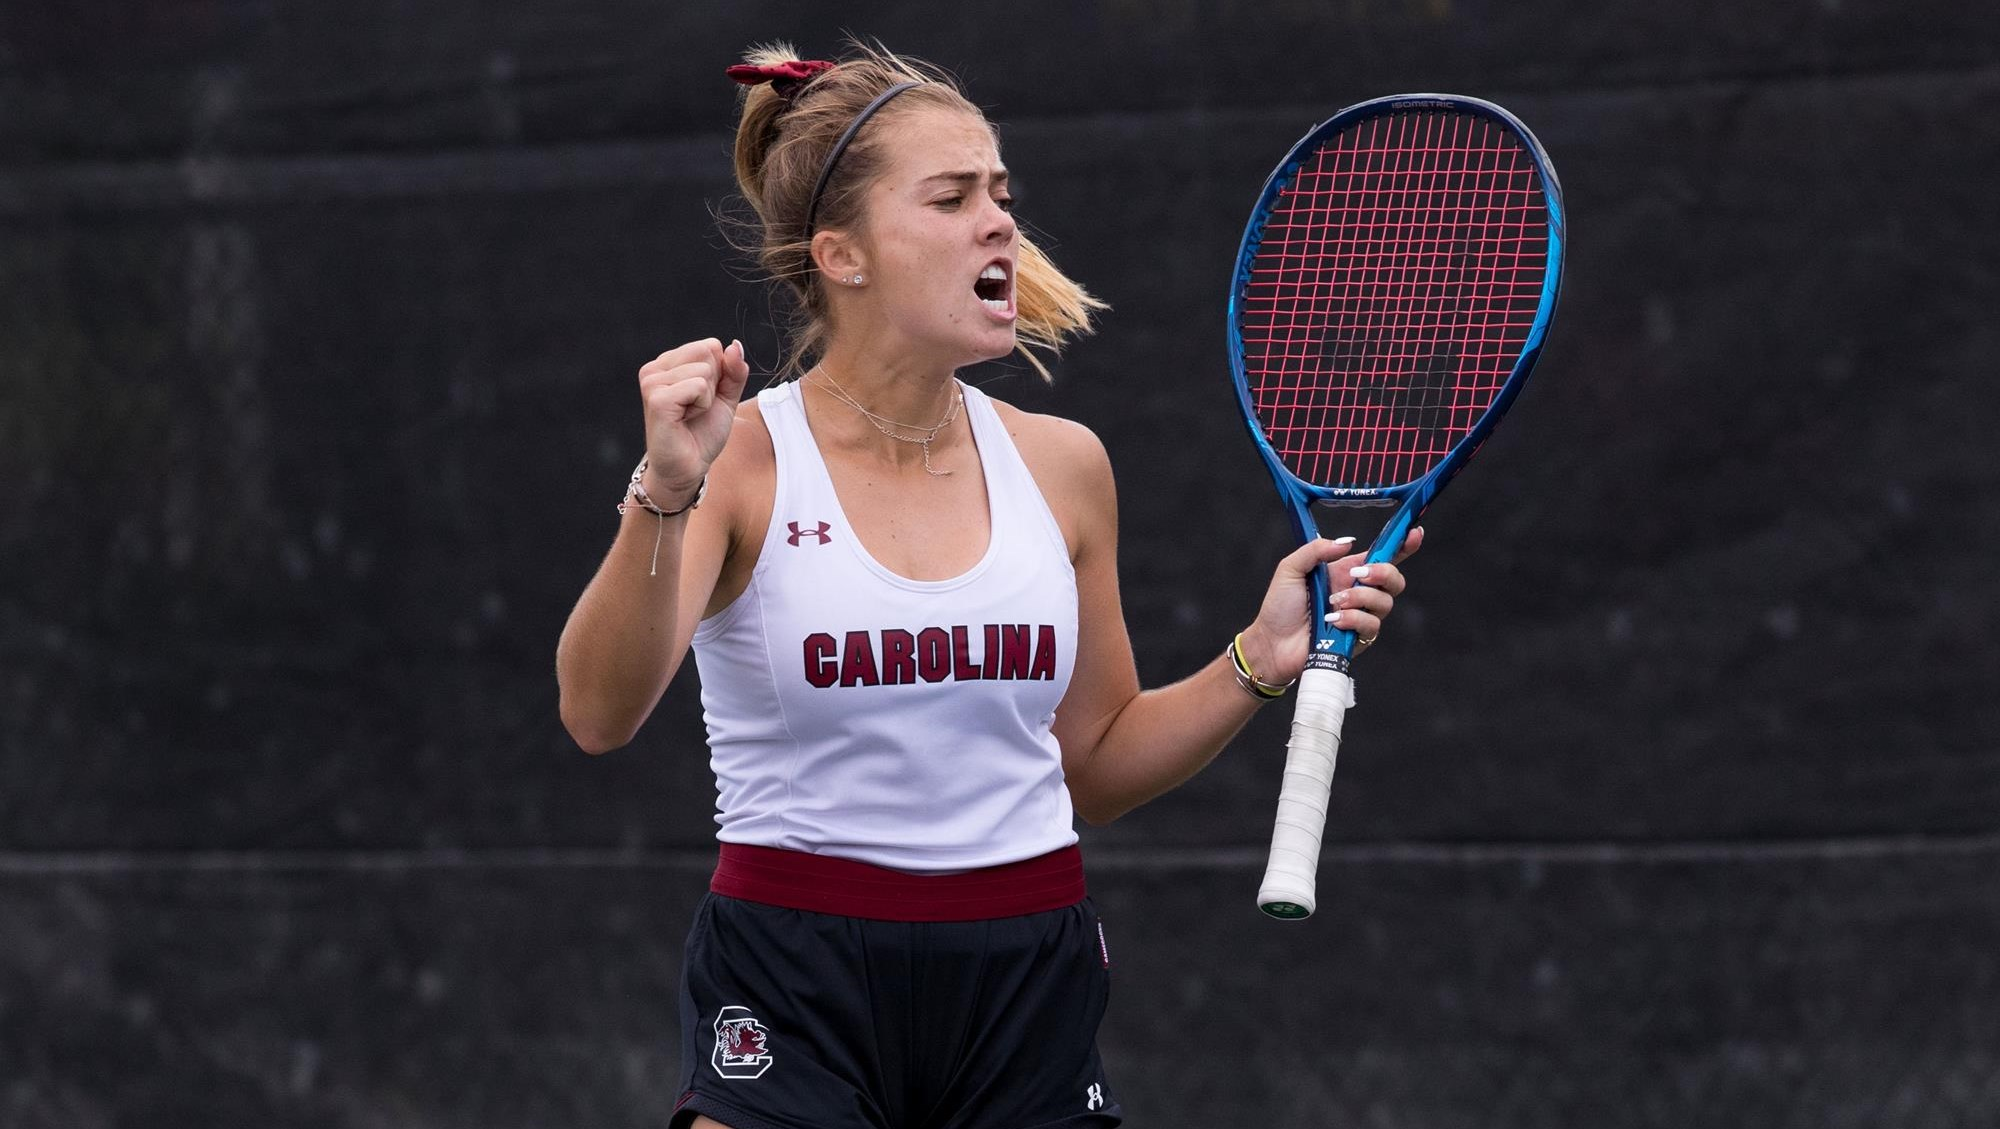 Newcomers Upset No. 2 Doubles Team on Day 1 of the Carolina Kickoff